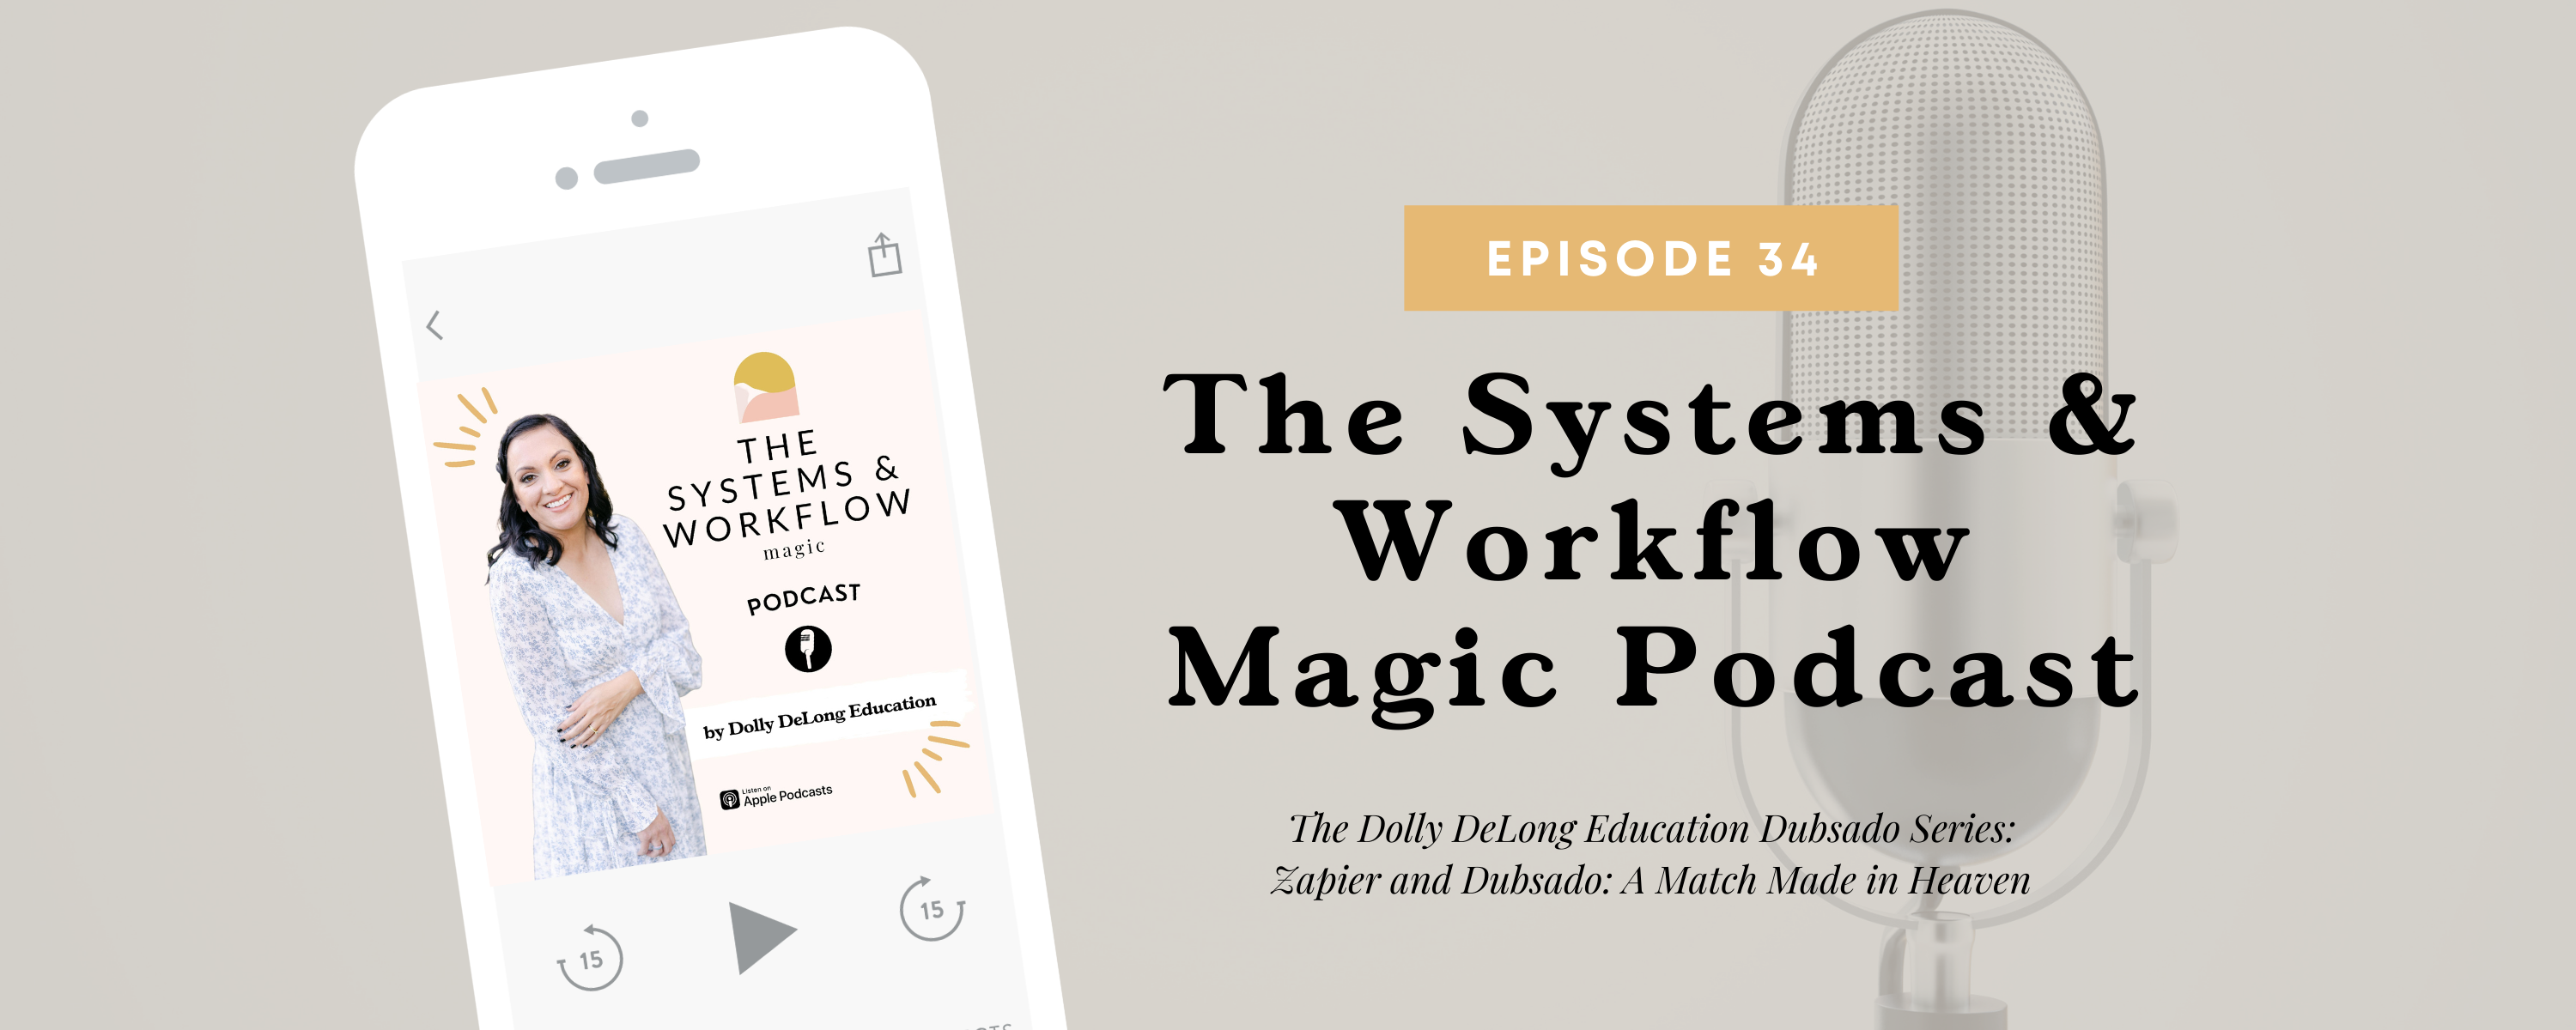 Episode 34 of the Systems and Workflow Magic Podcast Dubsado and Zapier